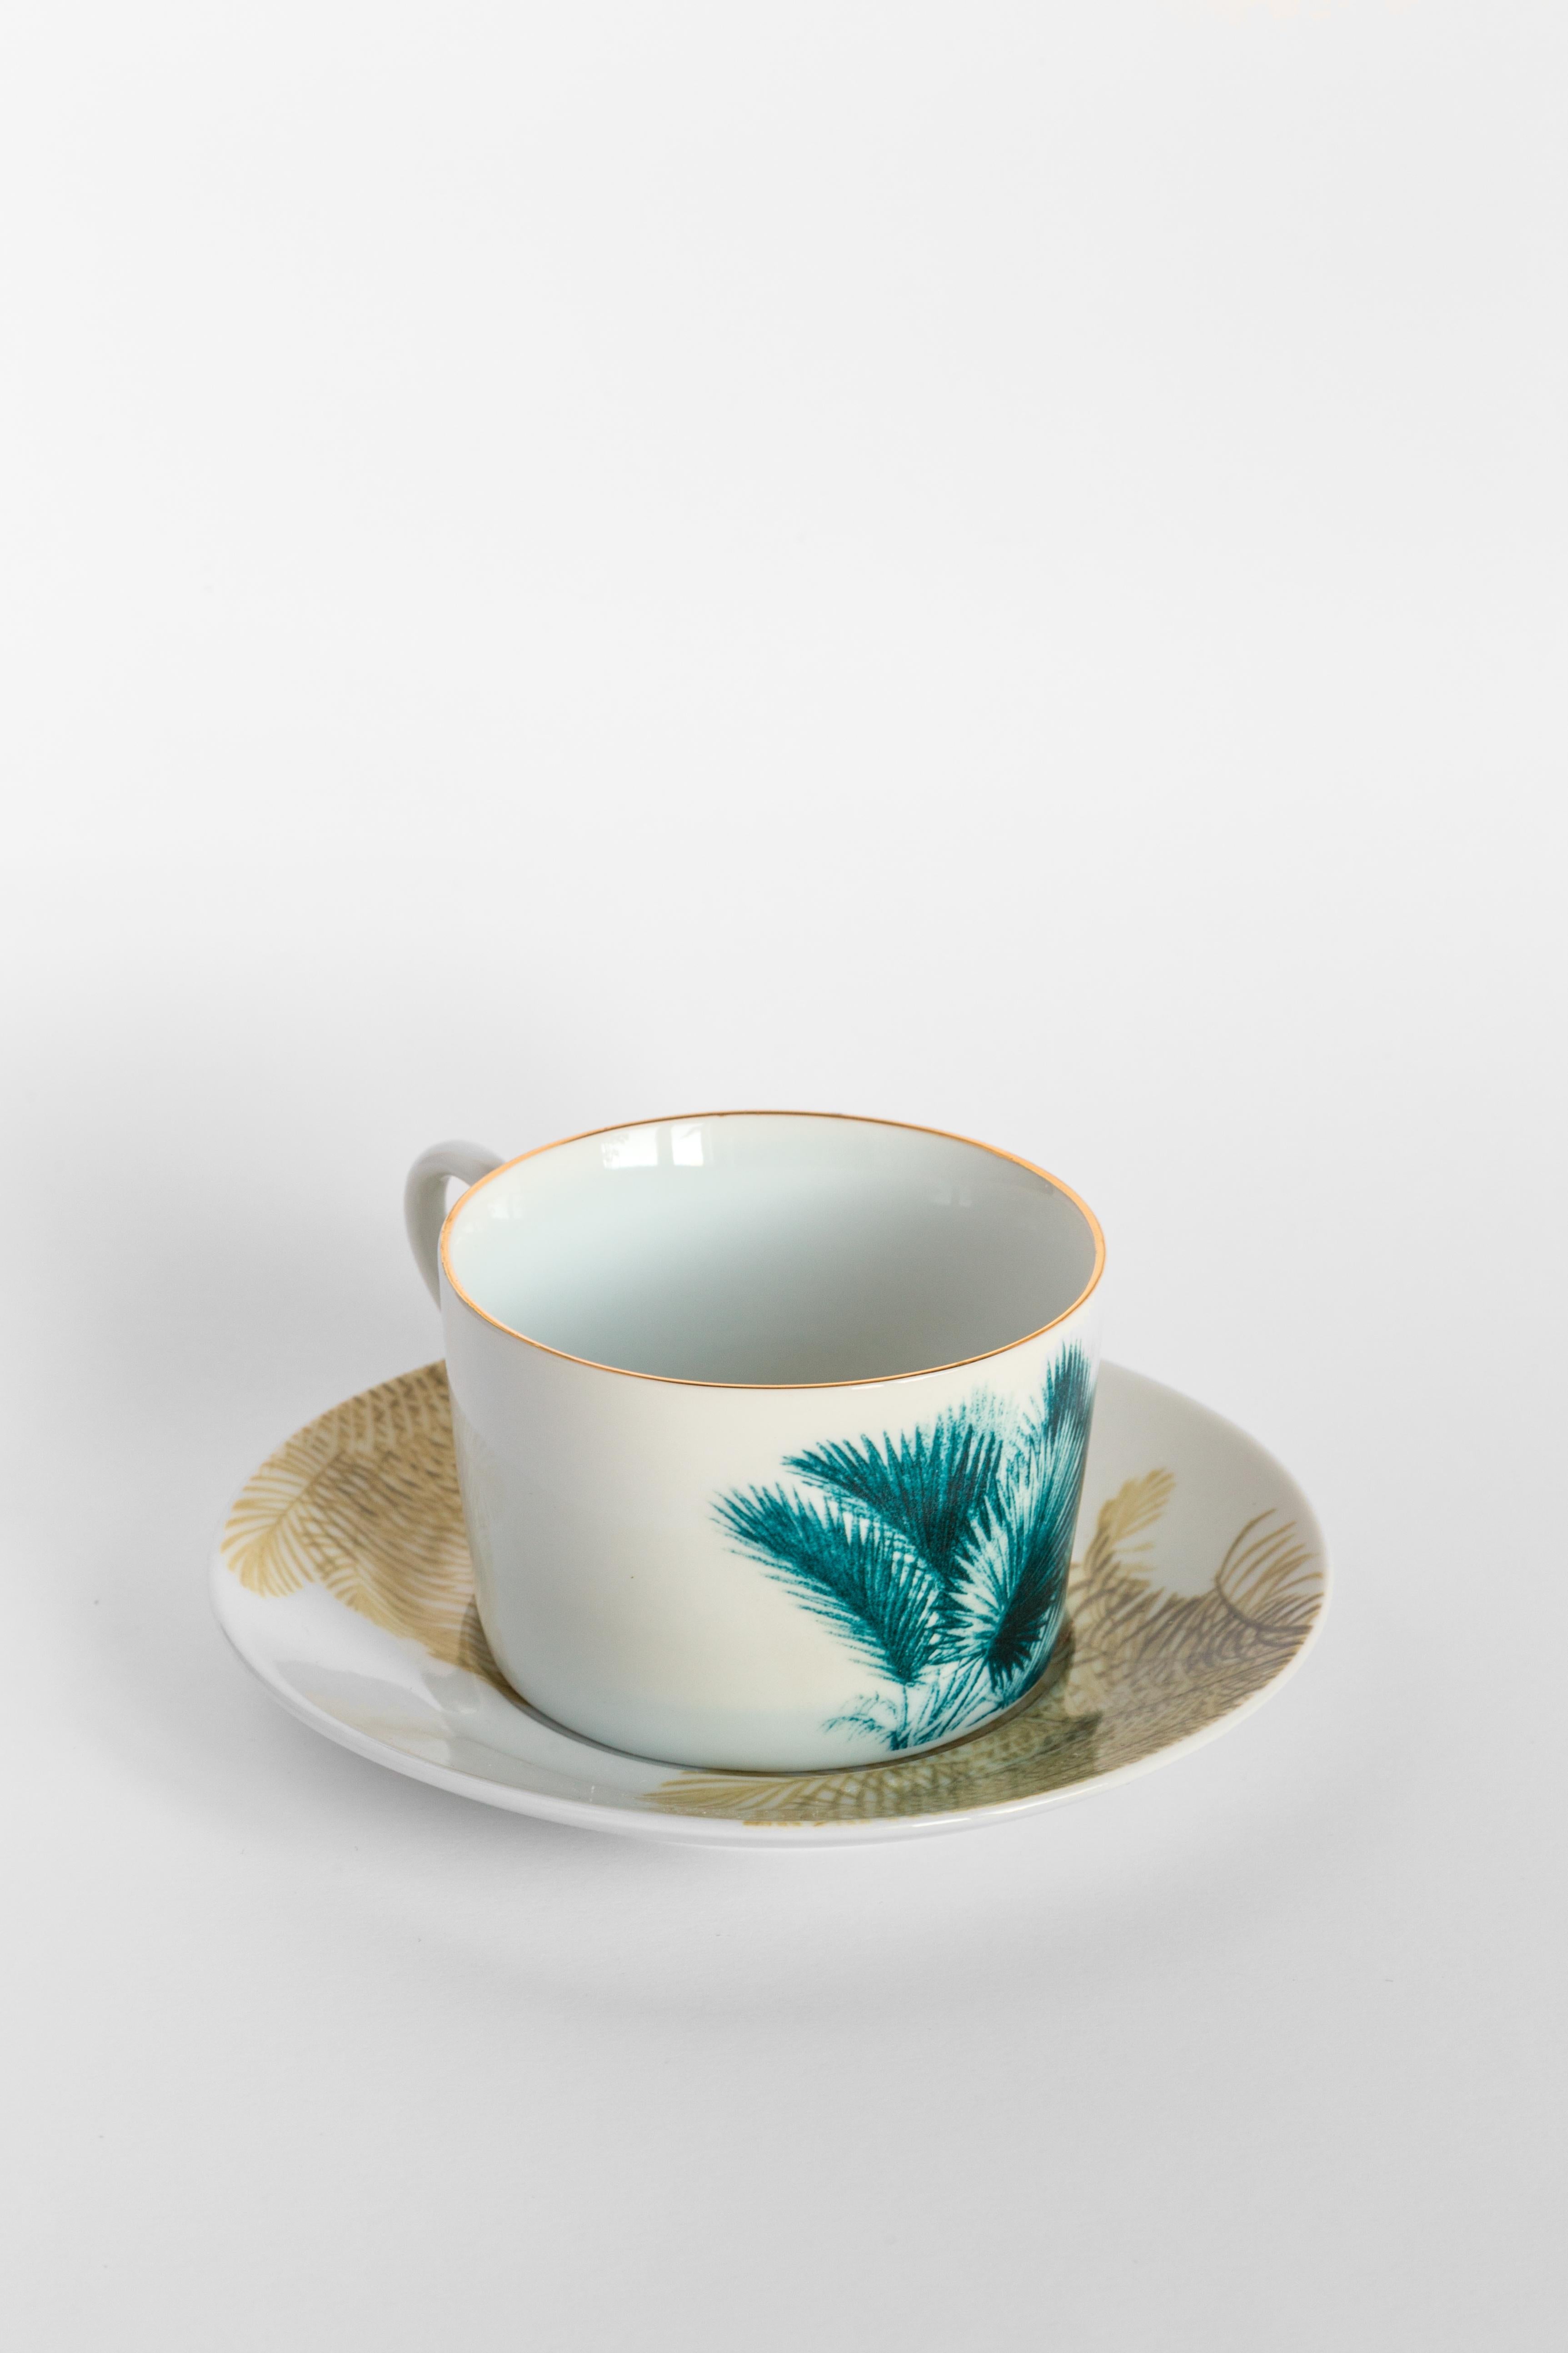 The Las Palmas Porcelain Collection owes its name to the city of Palmas, in Brazil. It is a true tribute to palm trees, whether it is their leaves, the whole plant, or even the landscape in which they live and thrive. The varied species represented